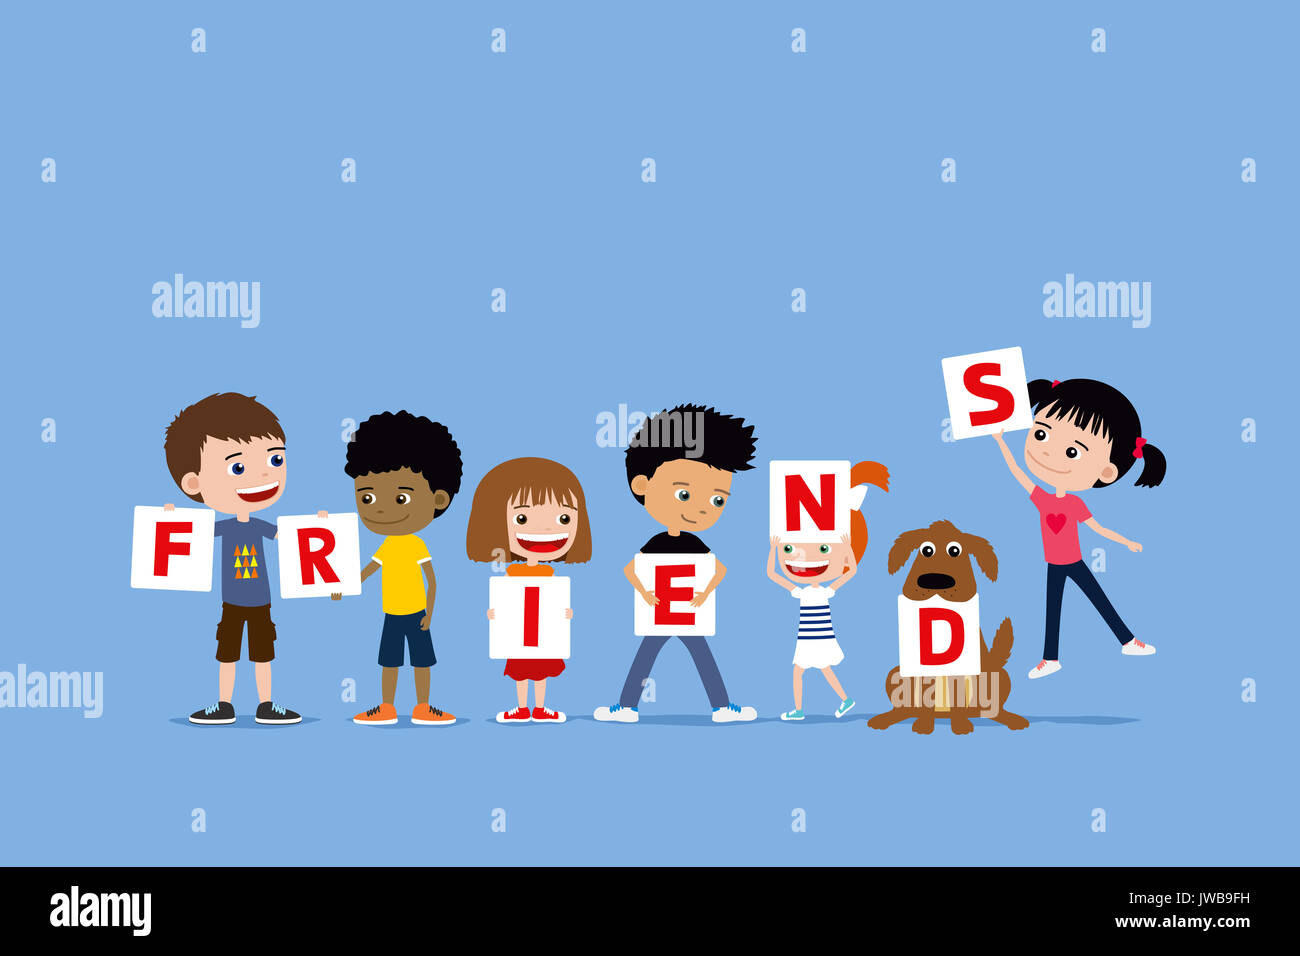 Group of children and a dog holding letters saying friends. Cute diverse cartoon illustration of little girls and boys. Stock Photo